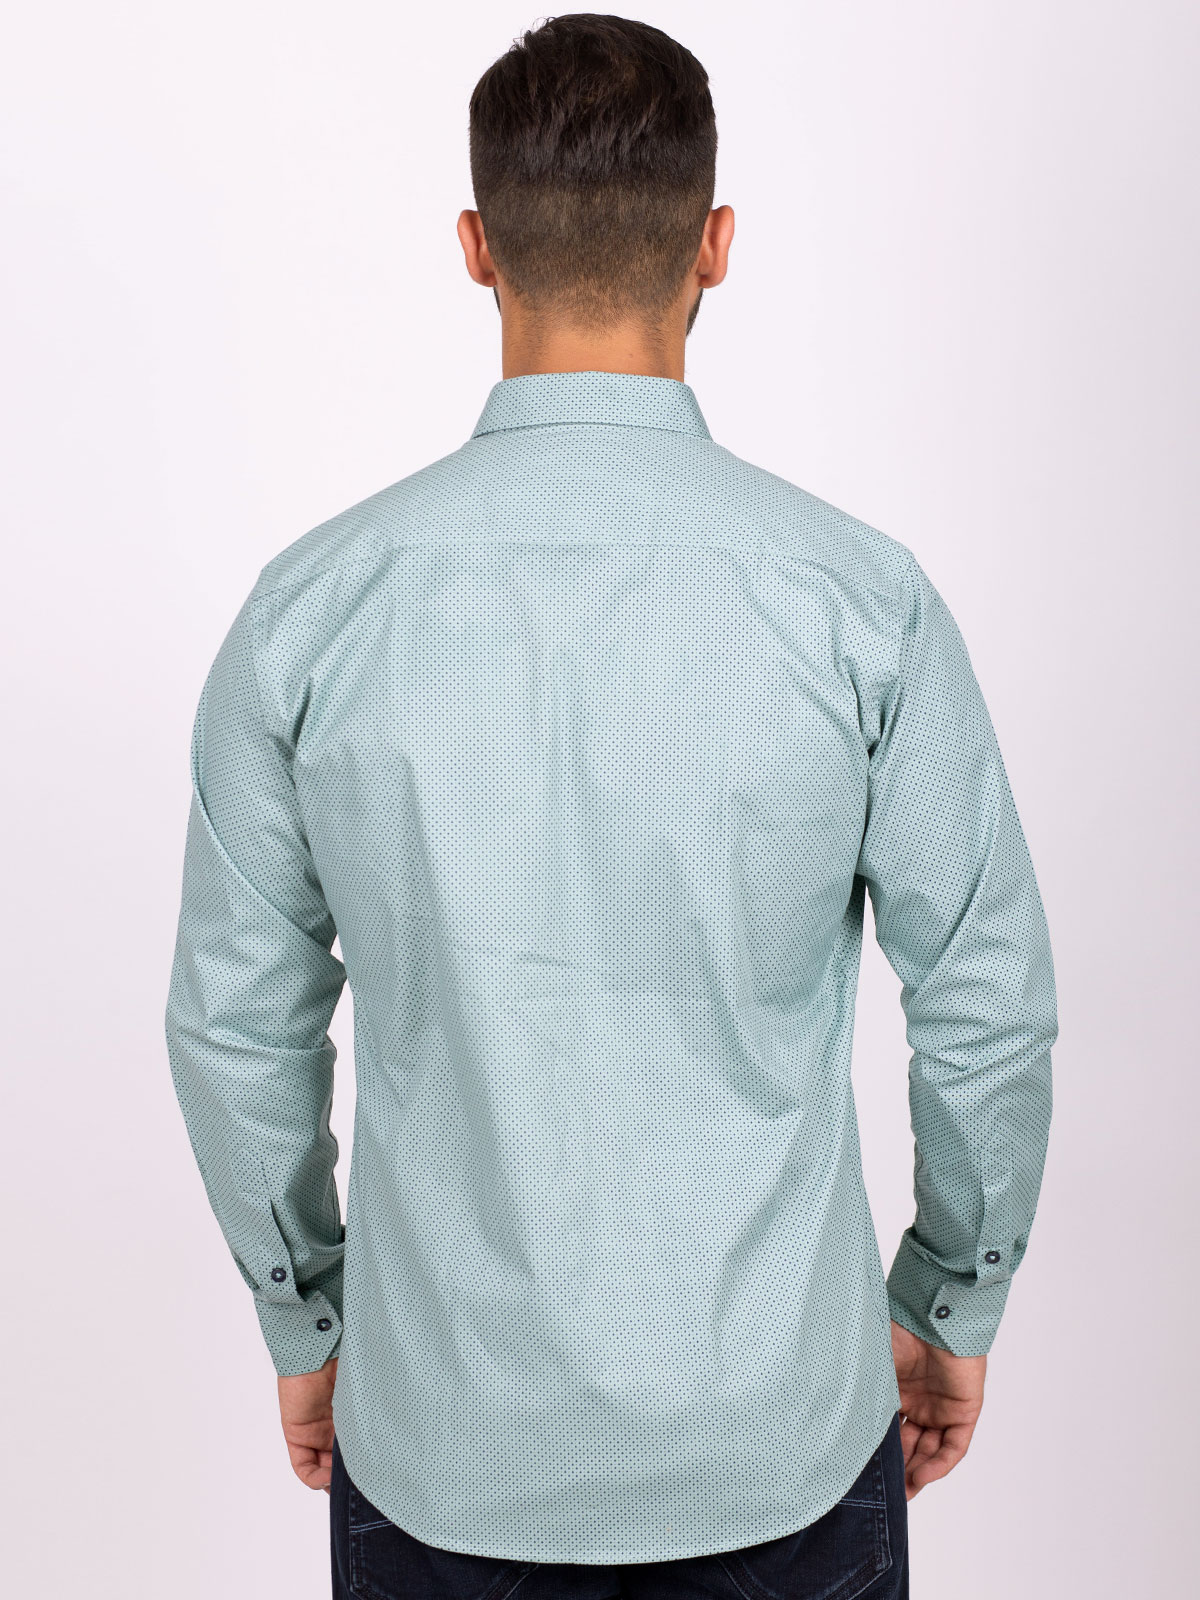 Shirt in mint color with blue patterns - 21509 € 43.87 img4